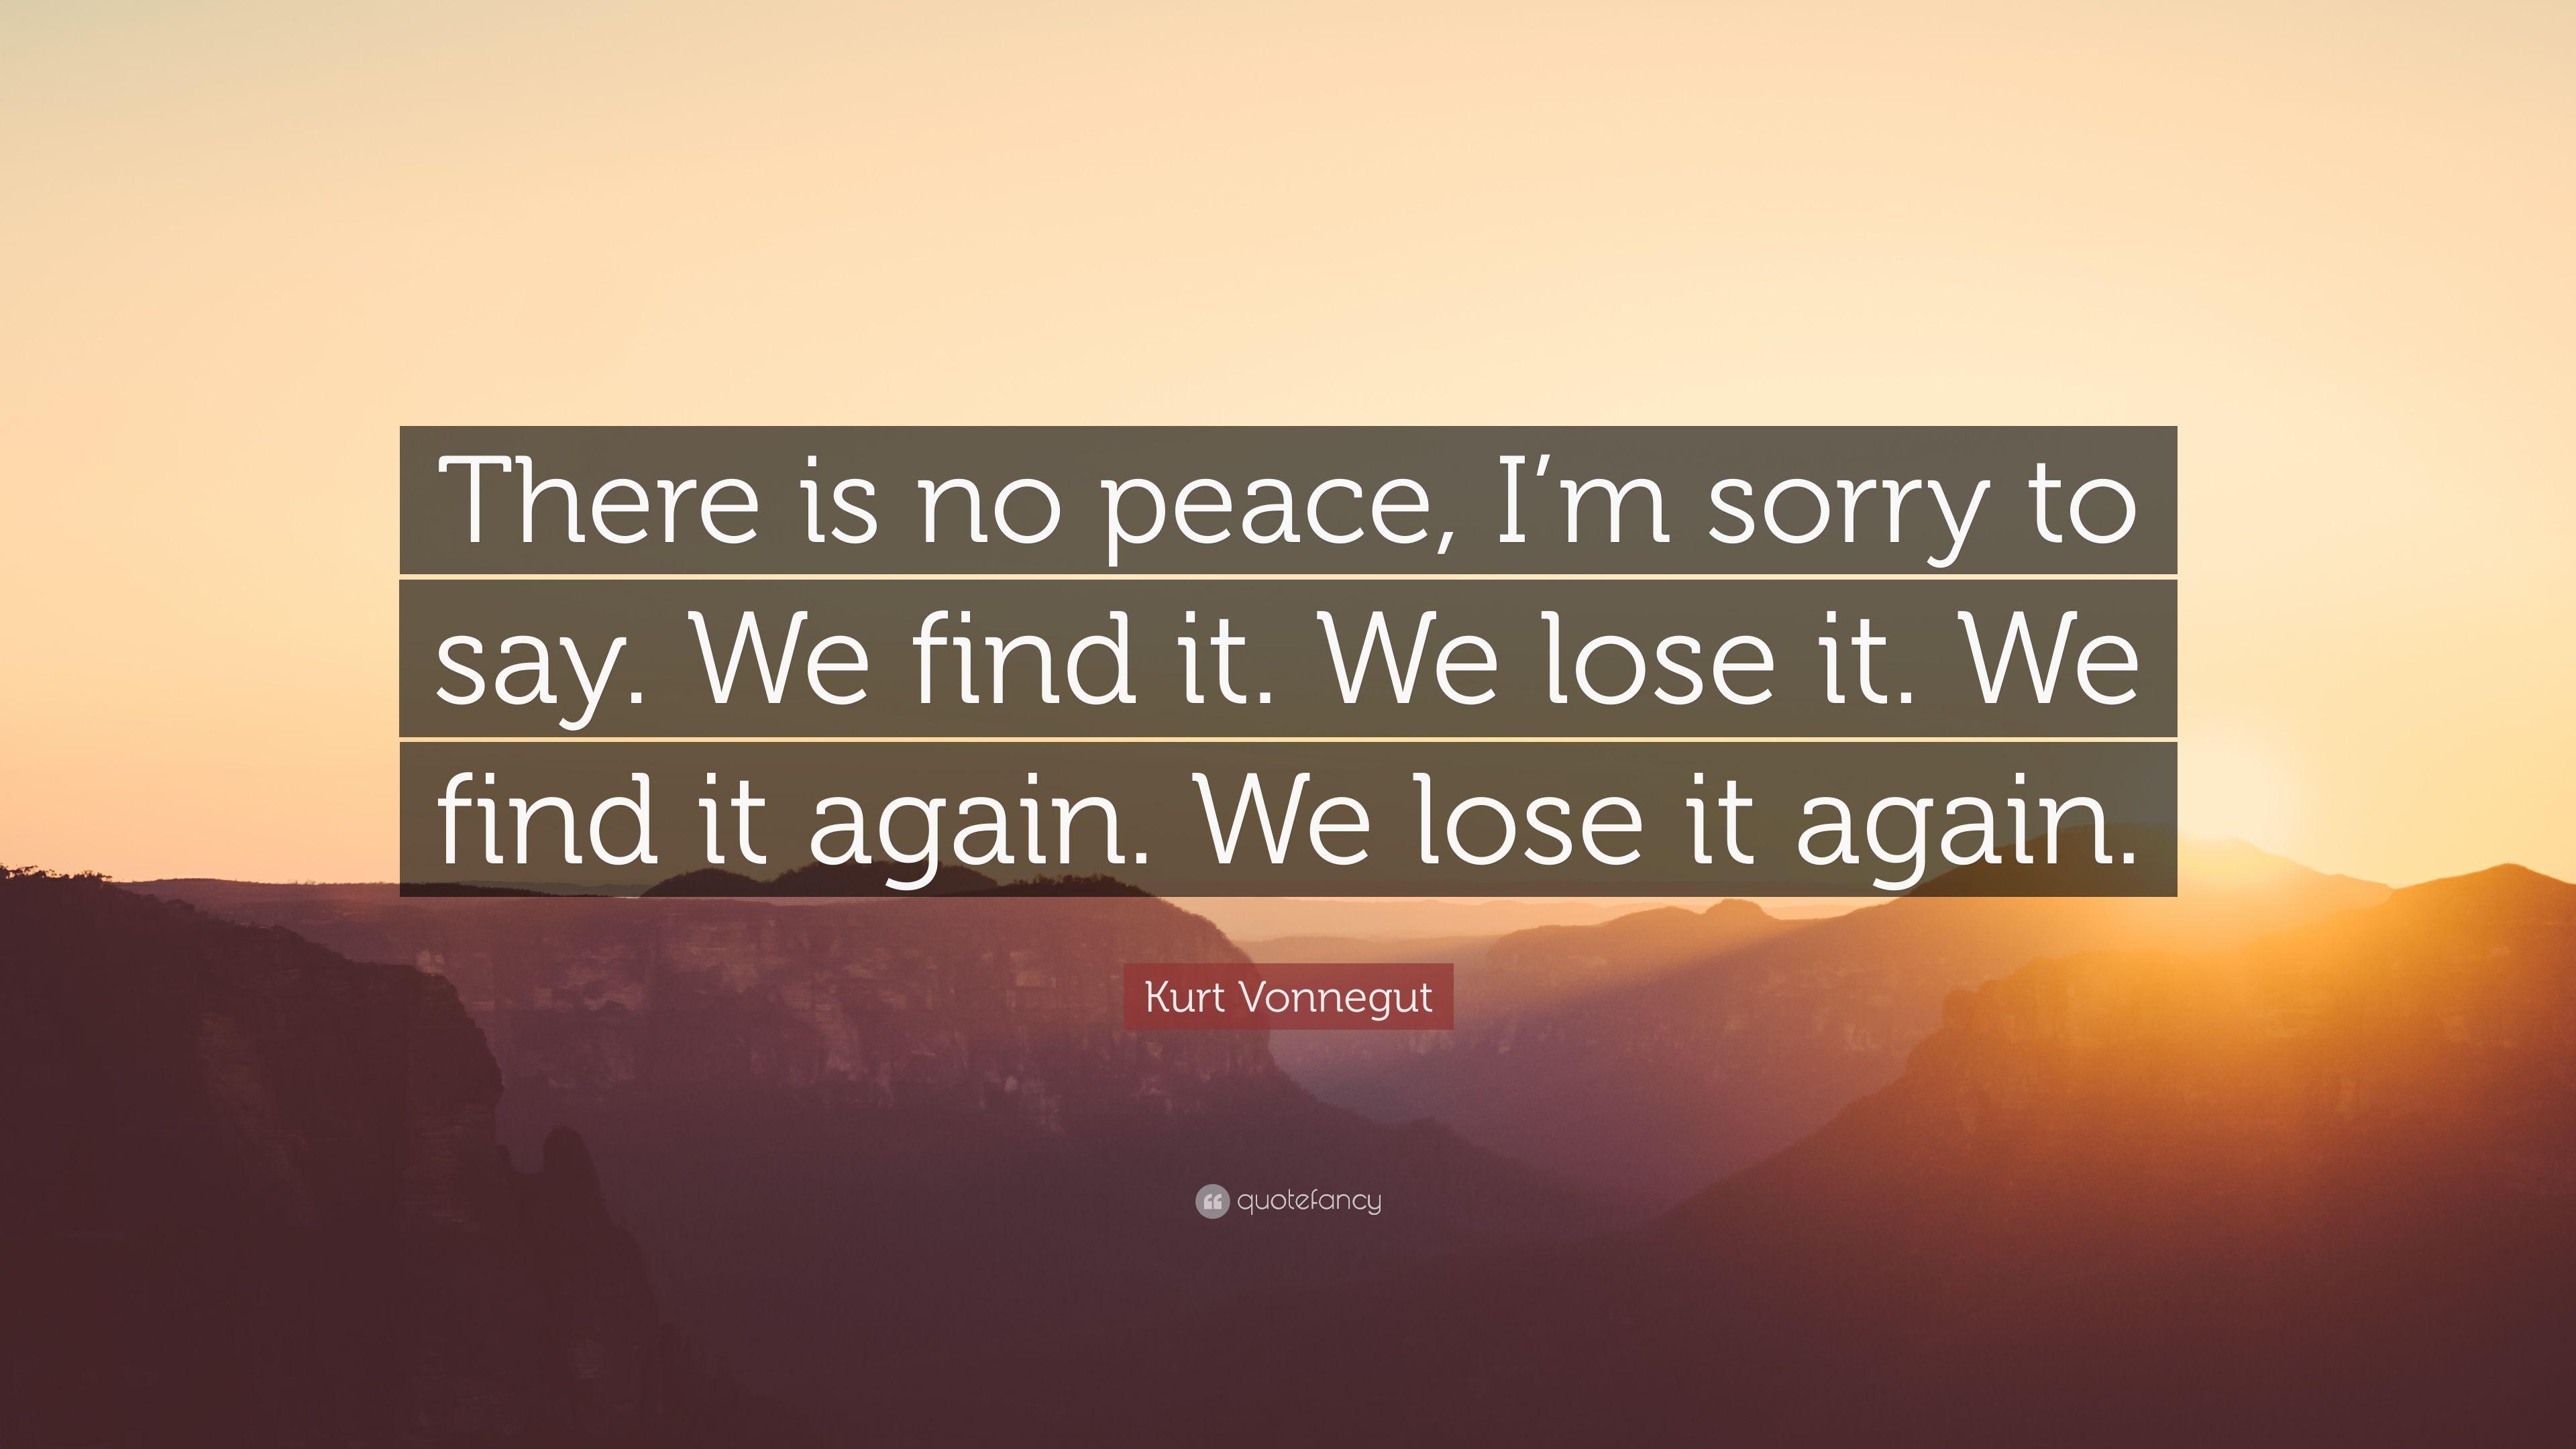 Kurt Vonnegut Quote: “There is no peace, I'm sorry to say. We find